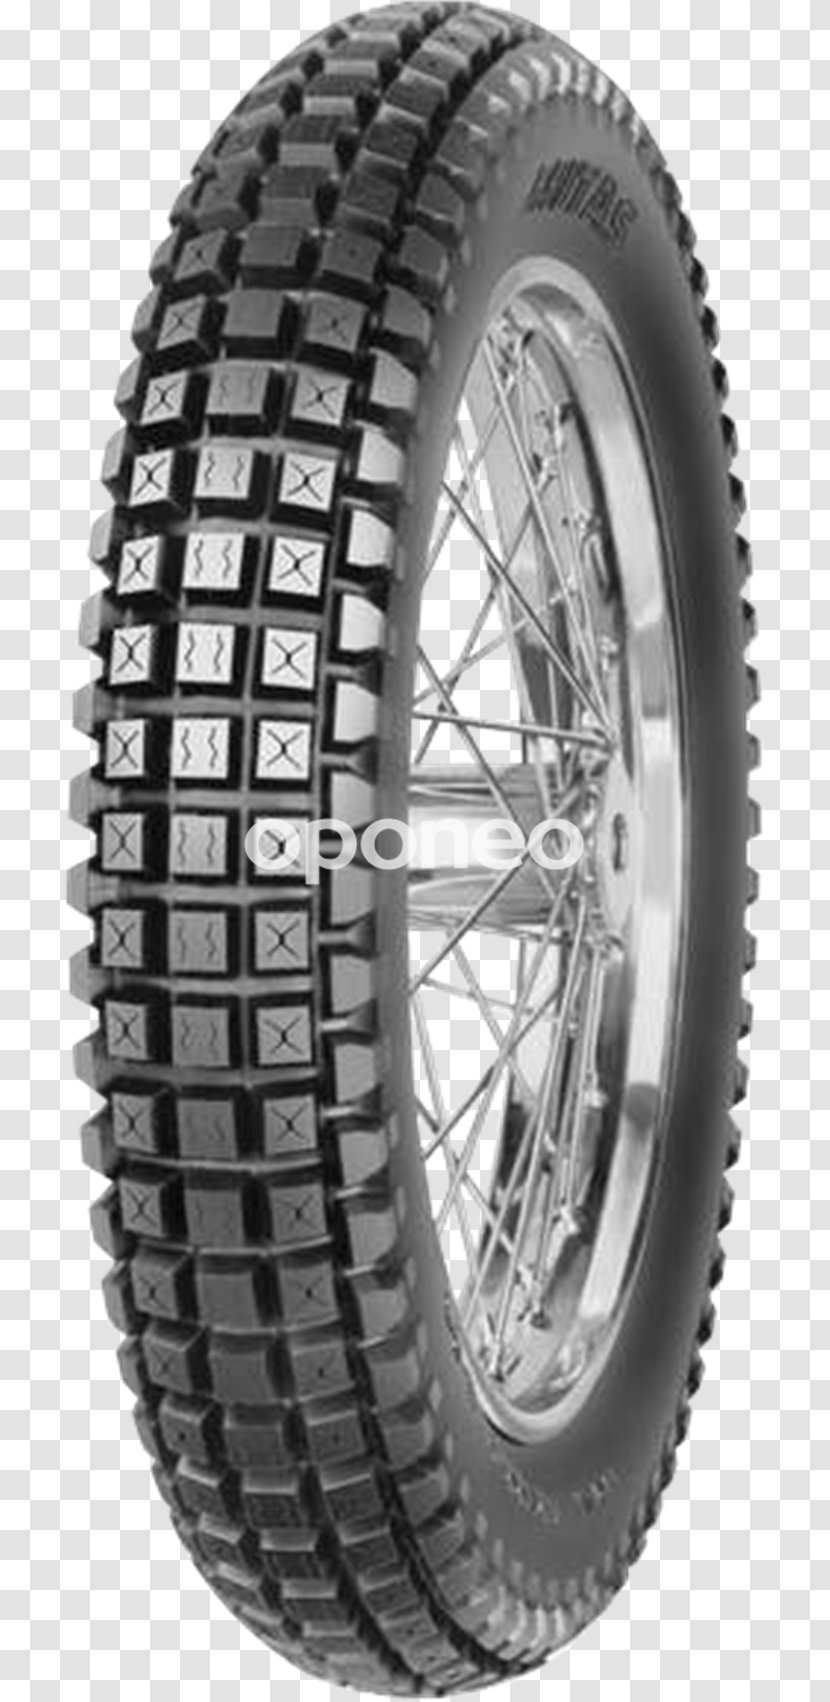 Motorcycle Tires Scooter Dual-sport - Trials Transparent PNG